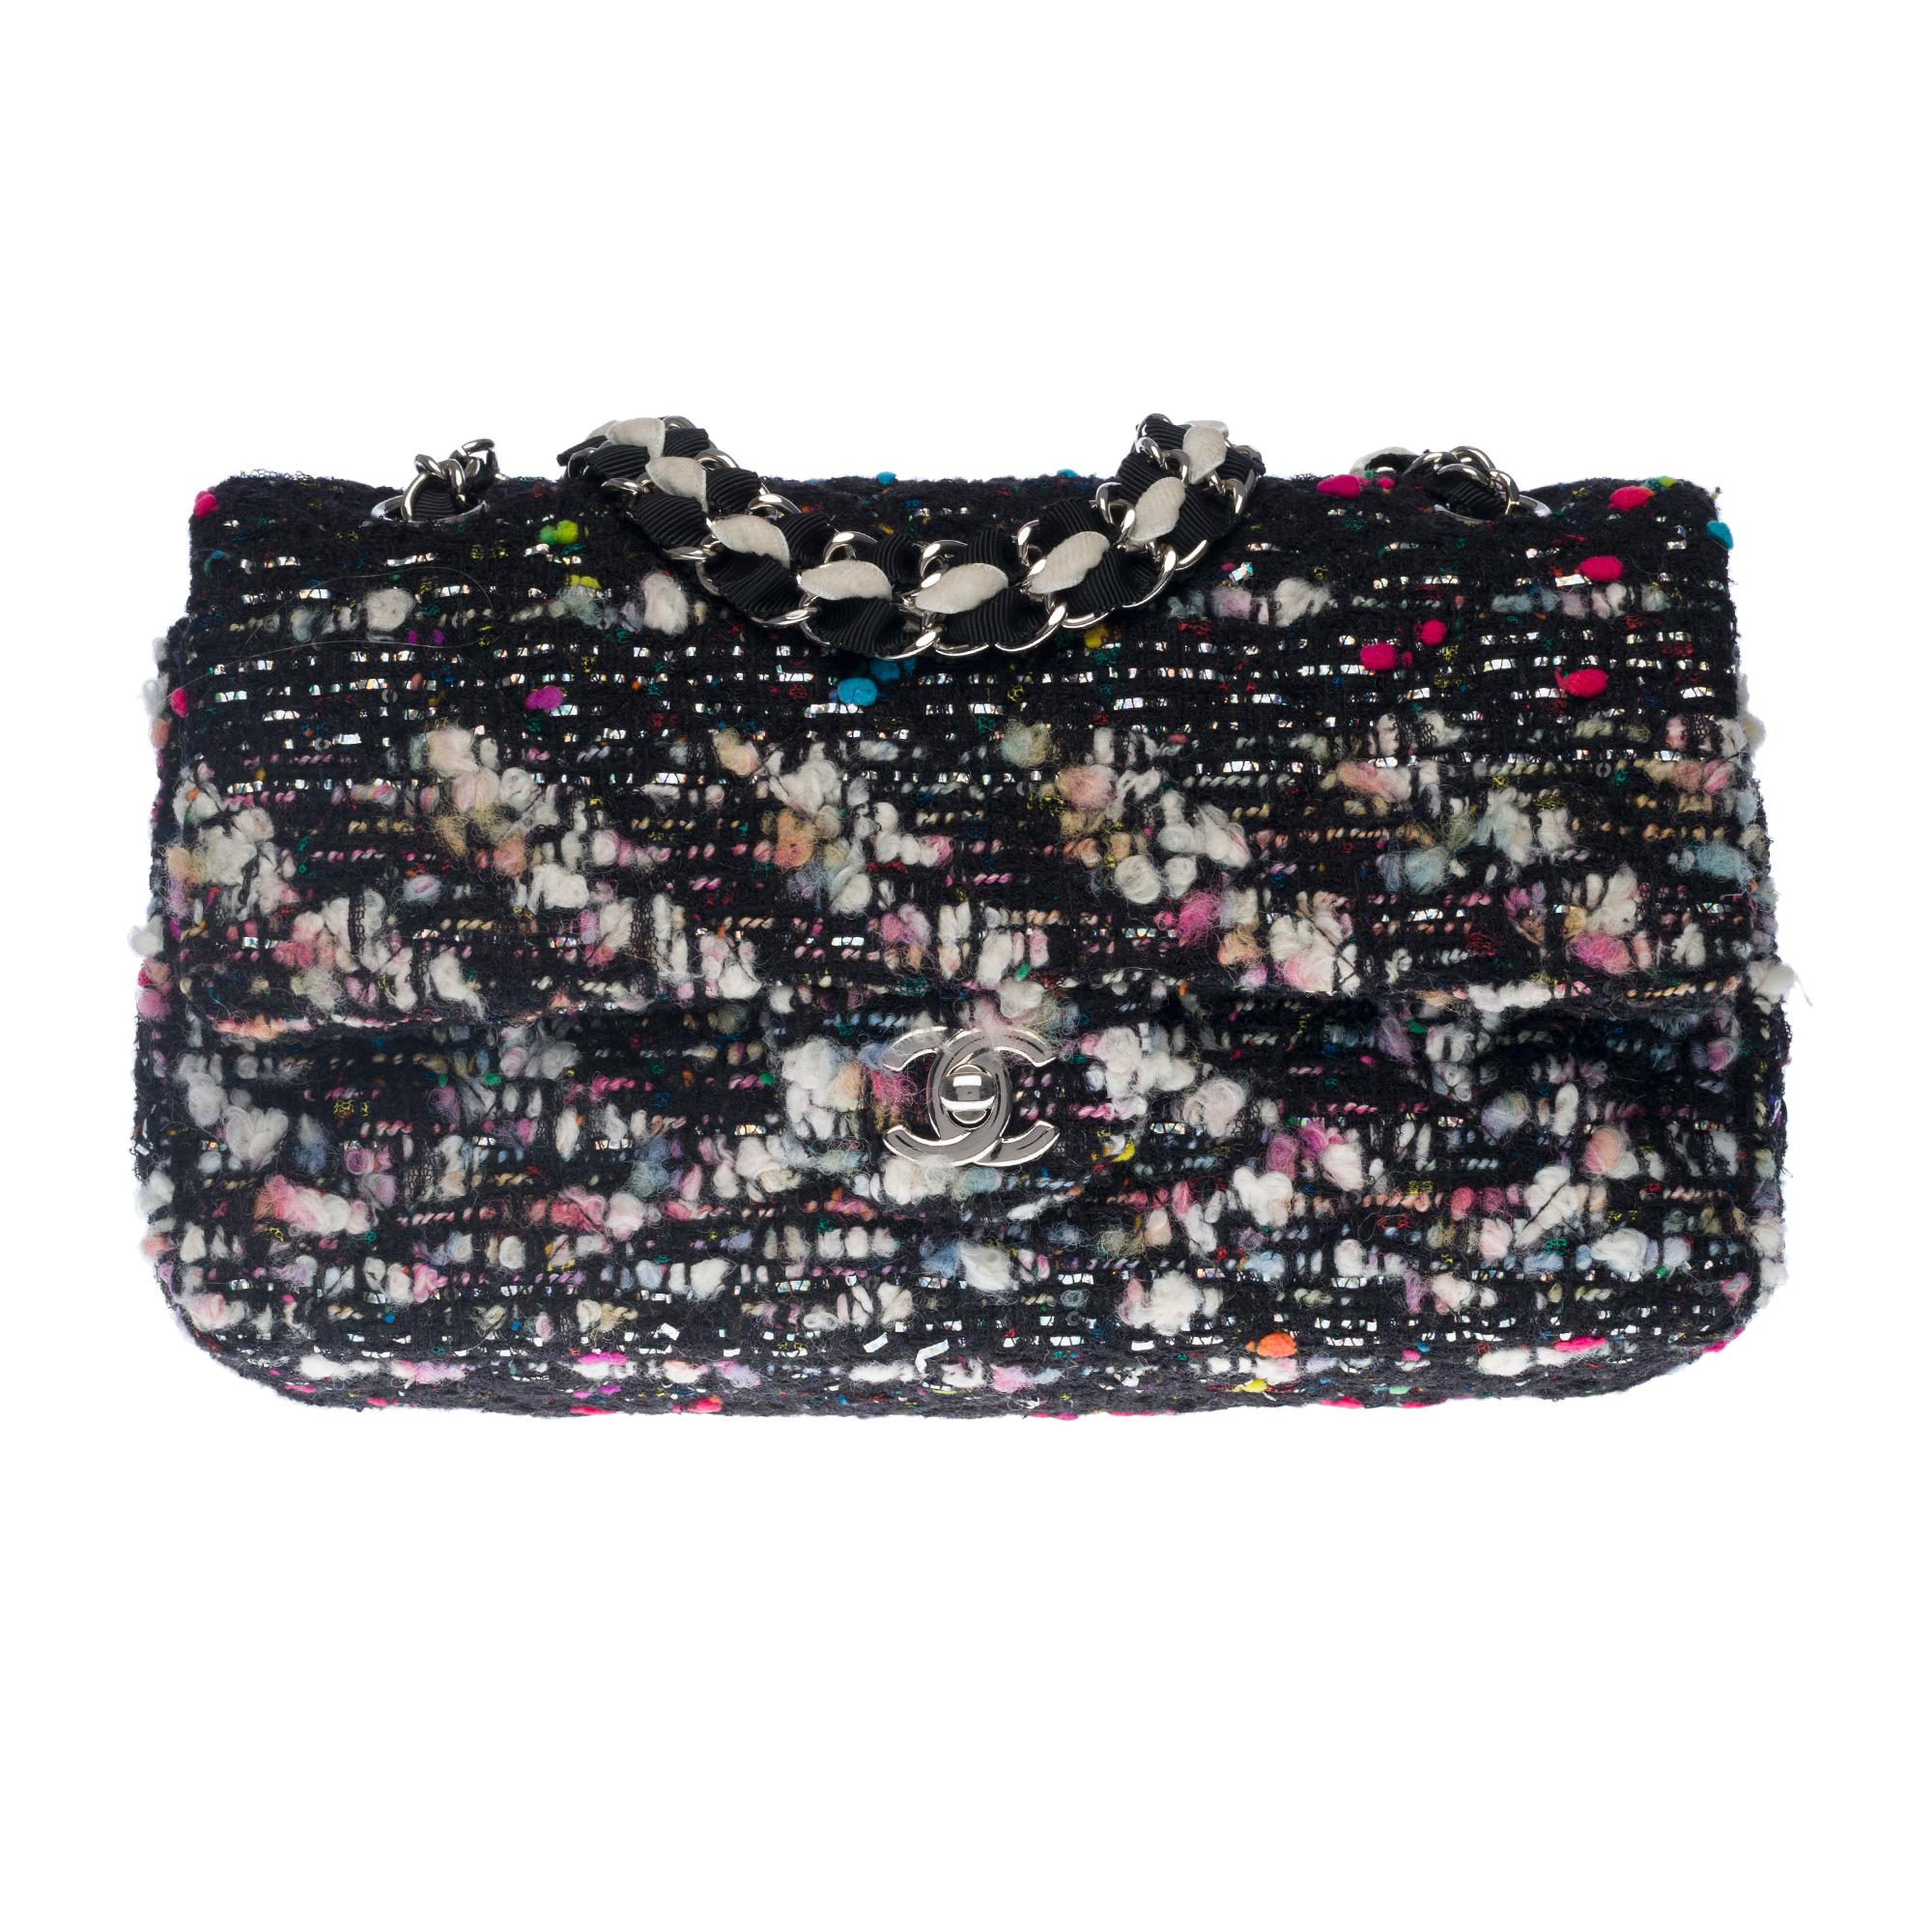 Rare and stunning Timeless Limited Edition Double Flap Bag in Black/Multicolor Quilted Tweed, silver metal hardware, silver metal handle intertwined with white and black ribbon allowing a hand or shoulder wear.
1 patch pocket on the back of the